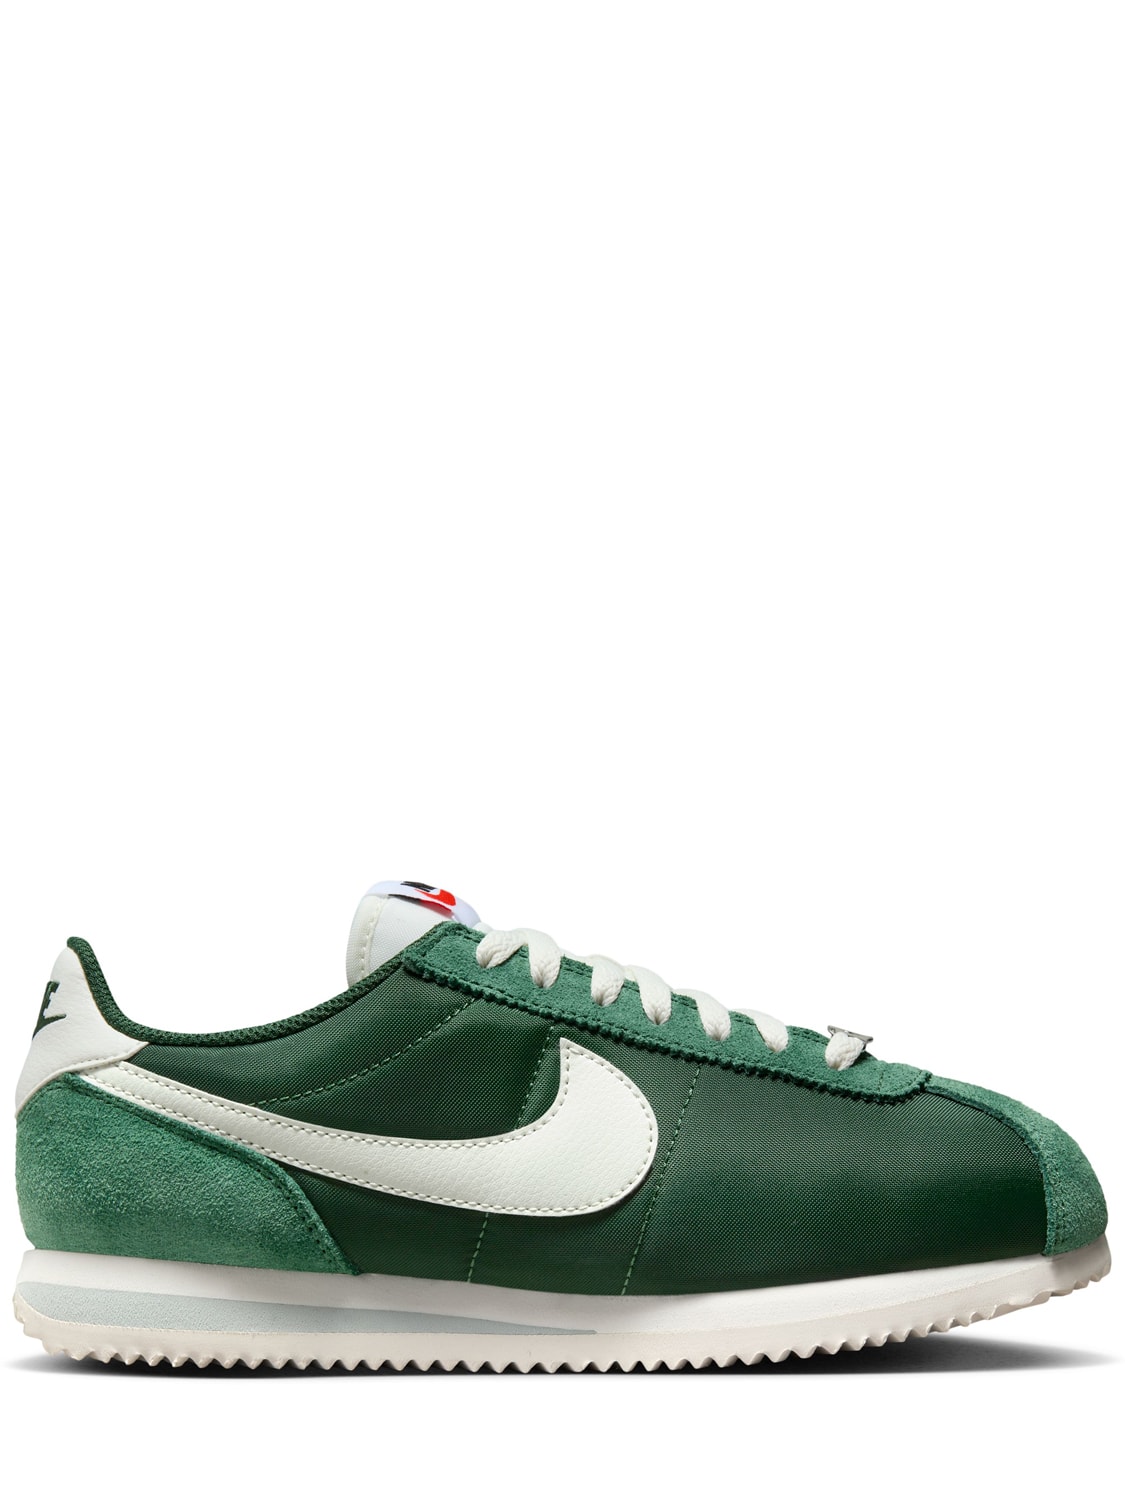 Image of Nike Cortez Sneakers